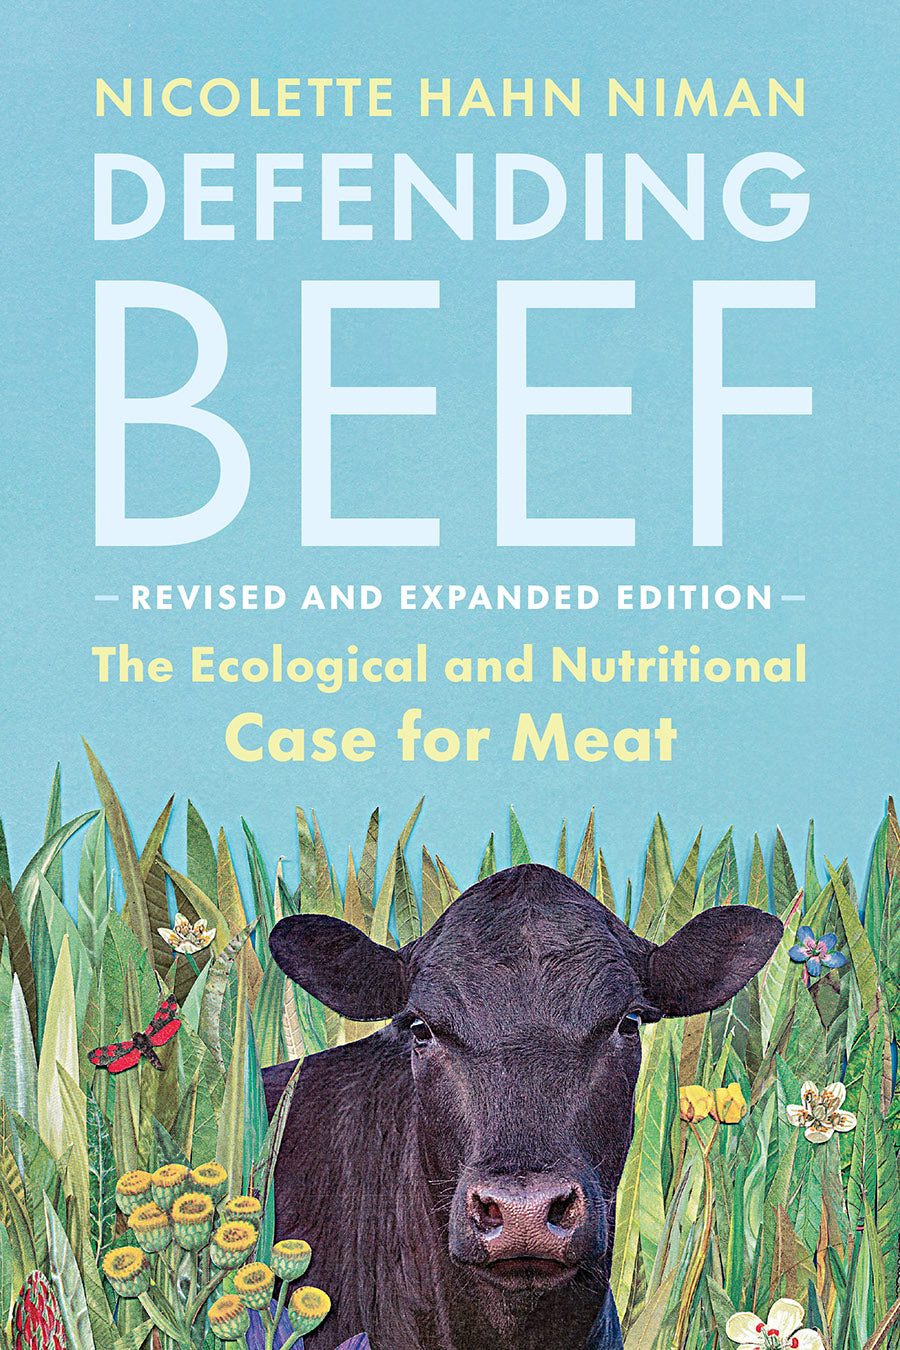 Defending Beef  The Ecological and Nutritional Case for Meat, 2nd Edition by Nicolette Hahn Niman